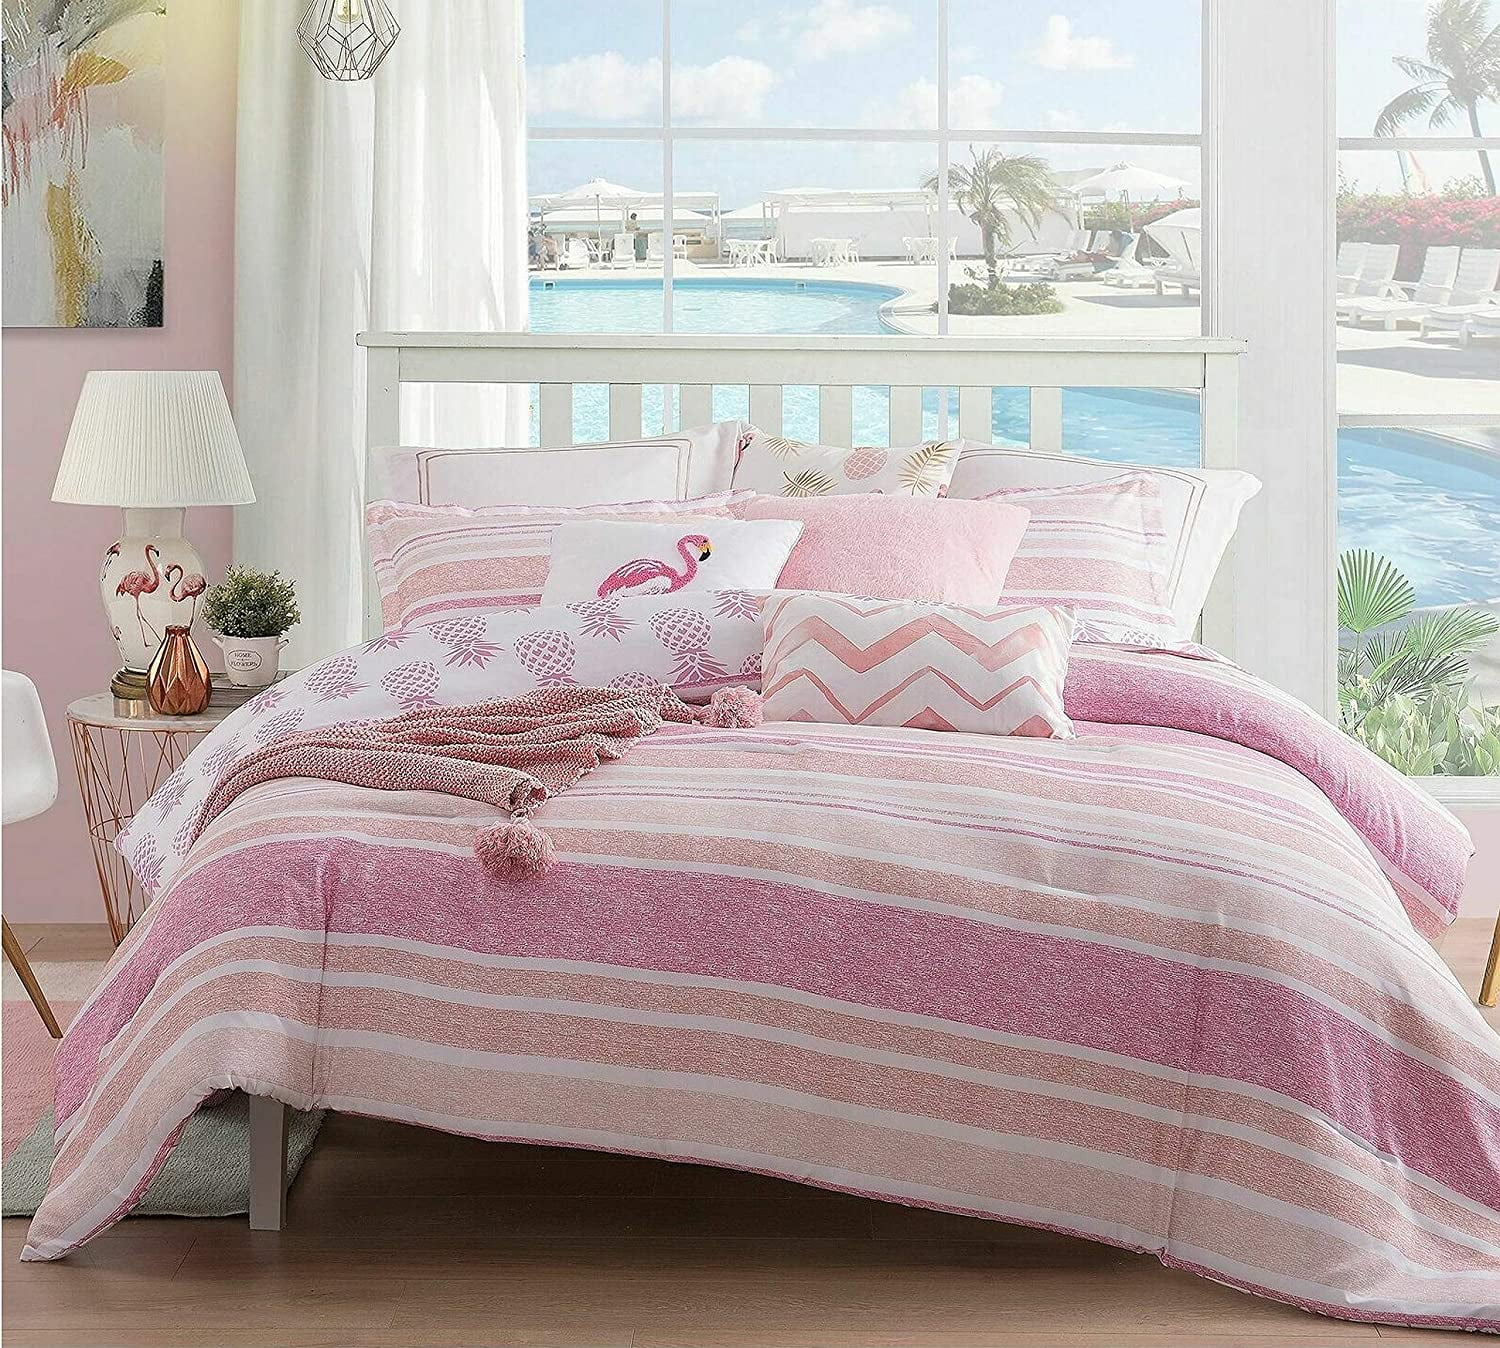 Details about   Magical Mermaids 3 Piece Pink Twin Sheet Set w Sham Pink and Blue Under the Sea 